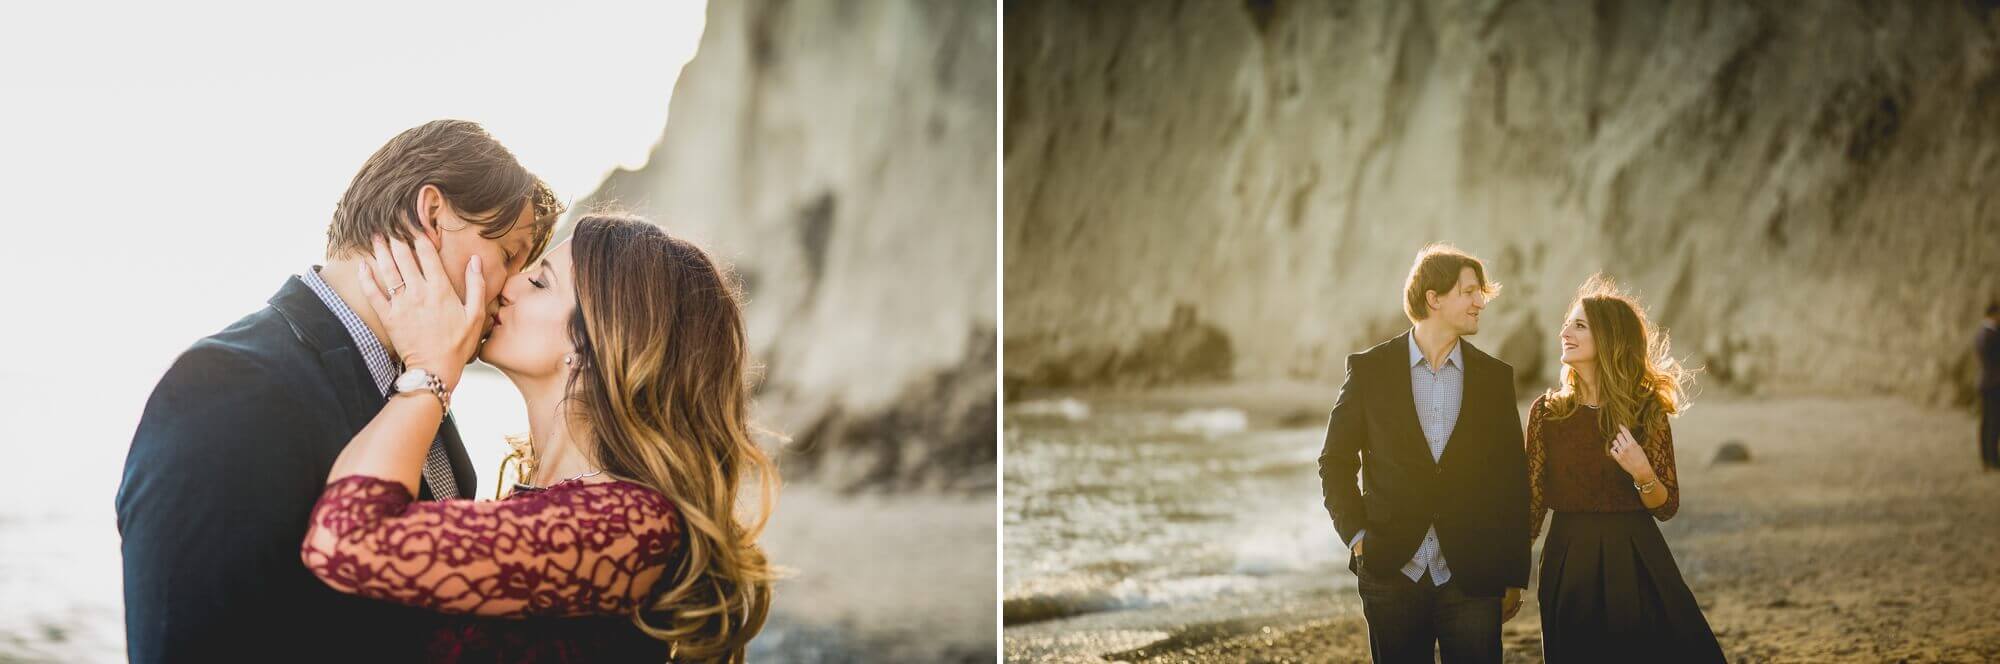 Romantic walk at Scarborough Bluffs for an engagement session in Toronto